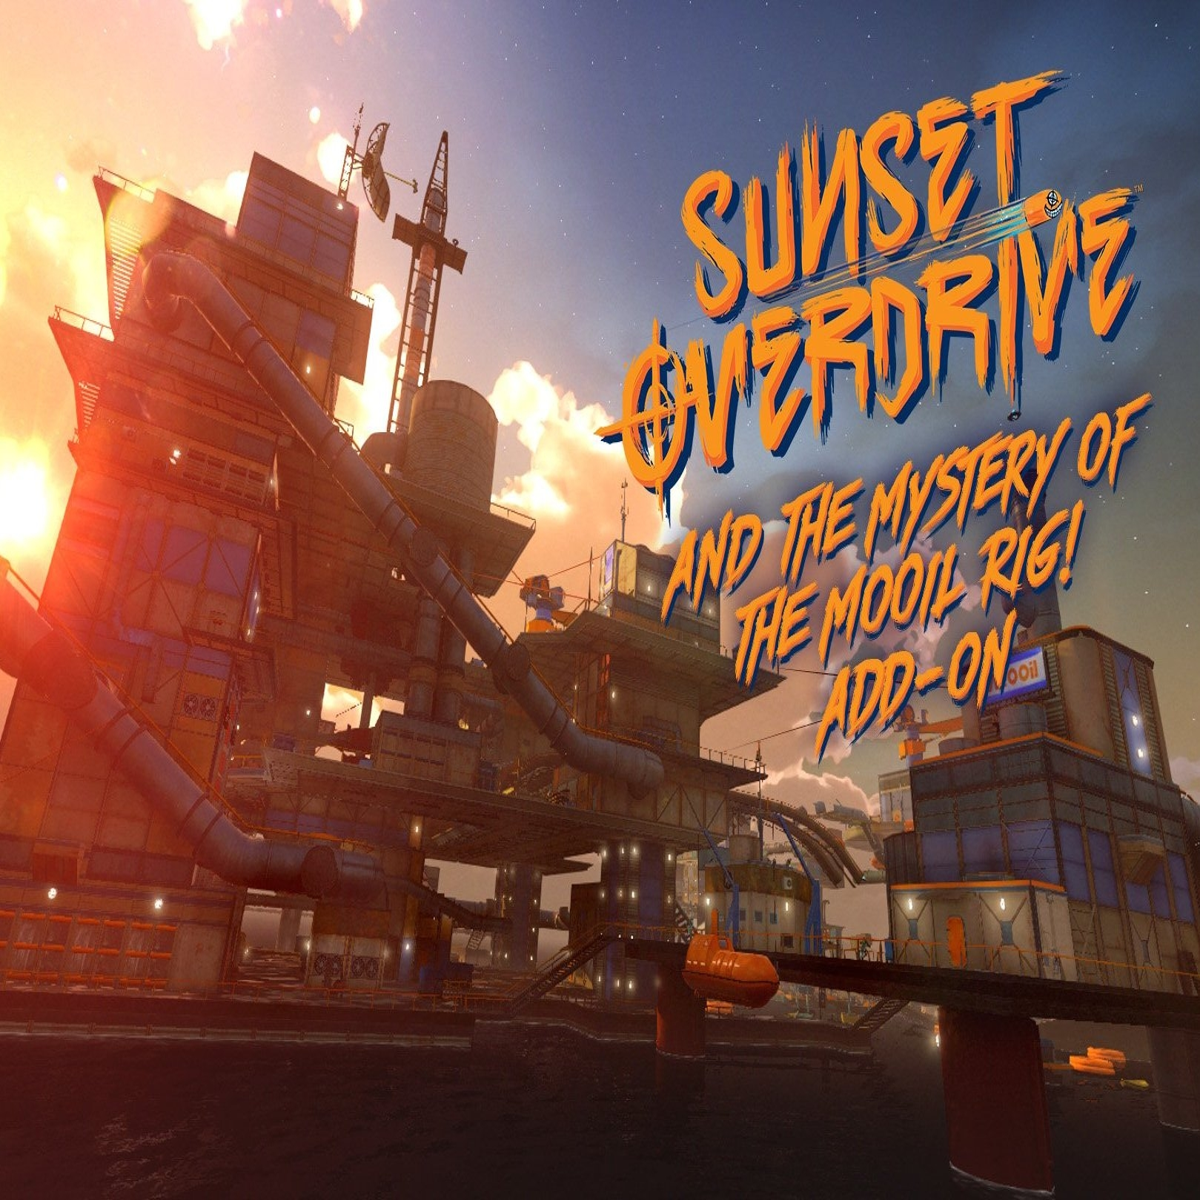 Spider-Man and Sunset Overdrive share a secret ingredient